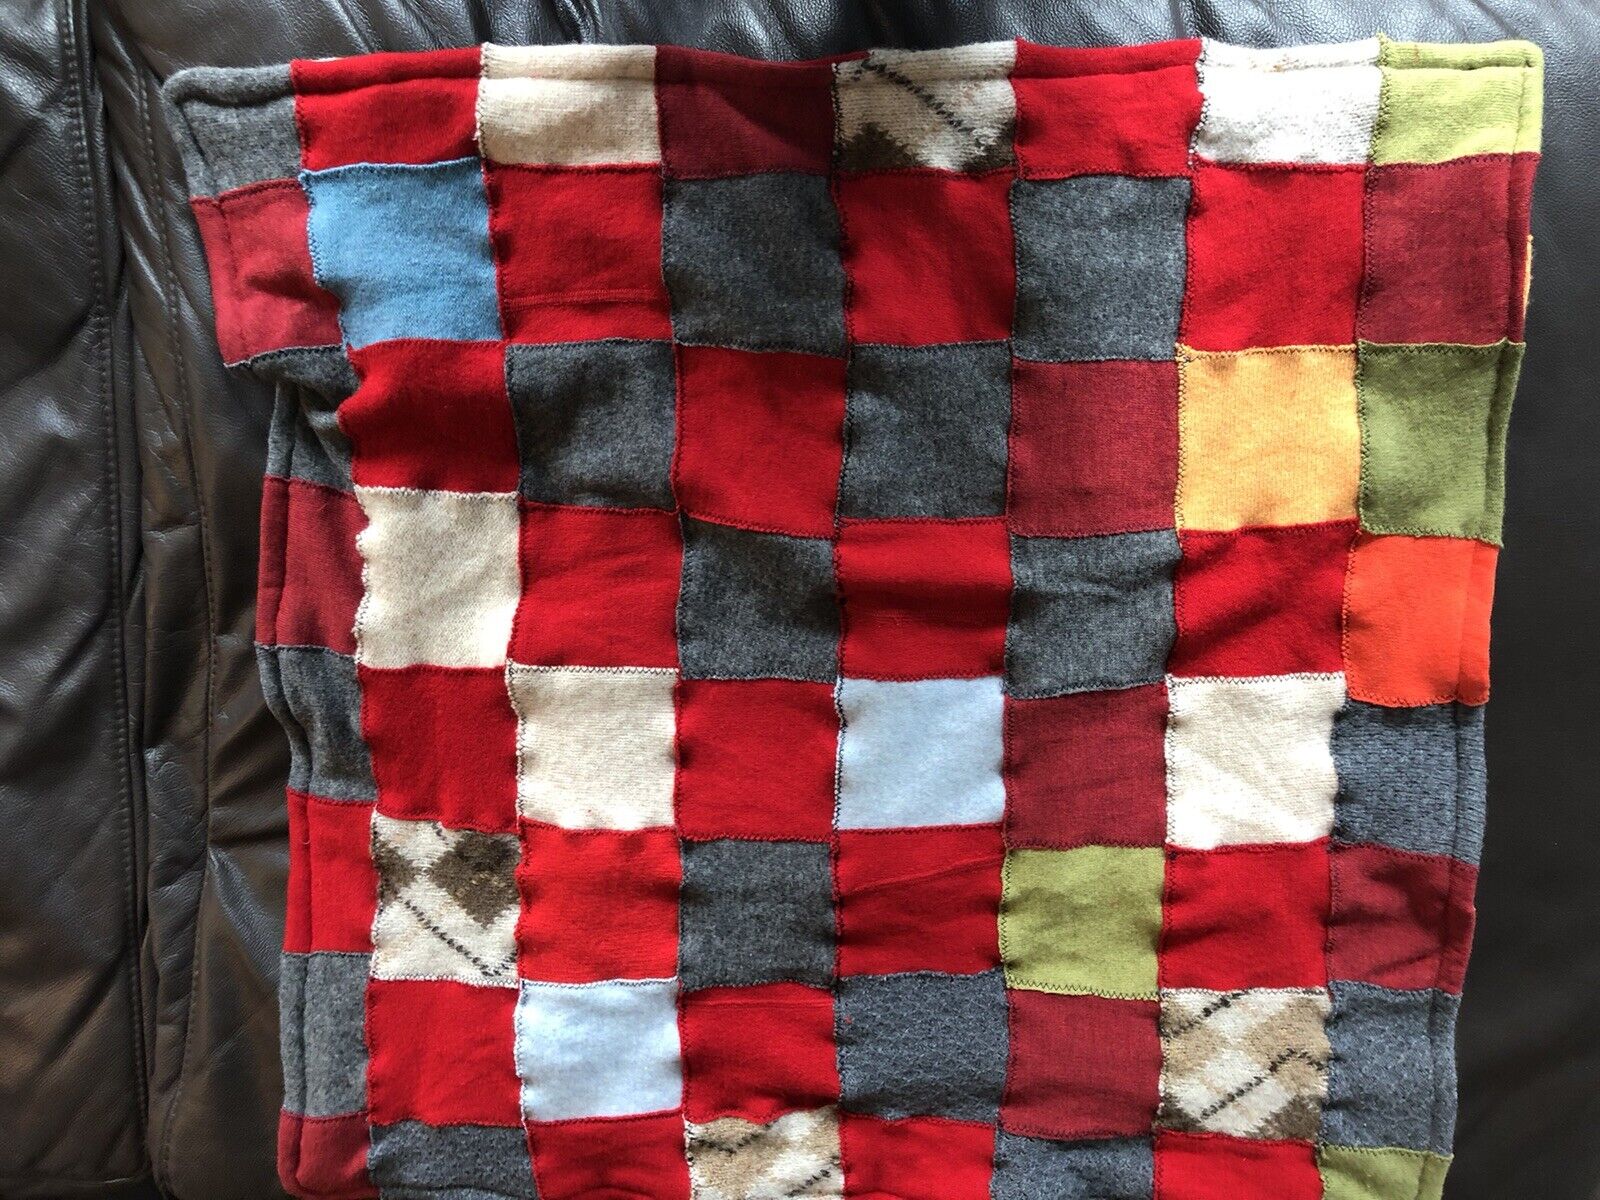 Handmade Quilt Wool Cashmere Patchwork Baby Blanket Colorful For Crib Stroller